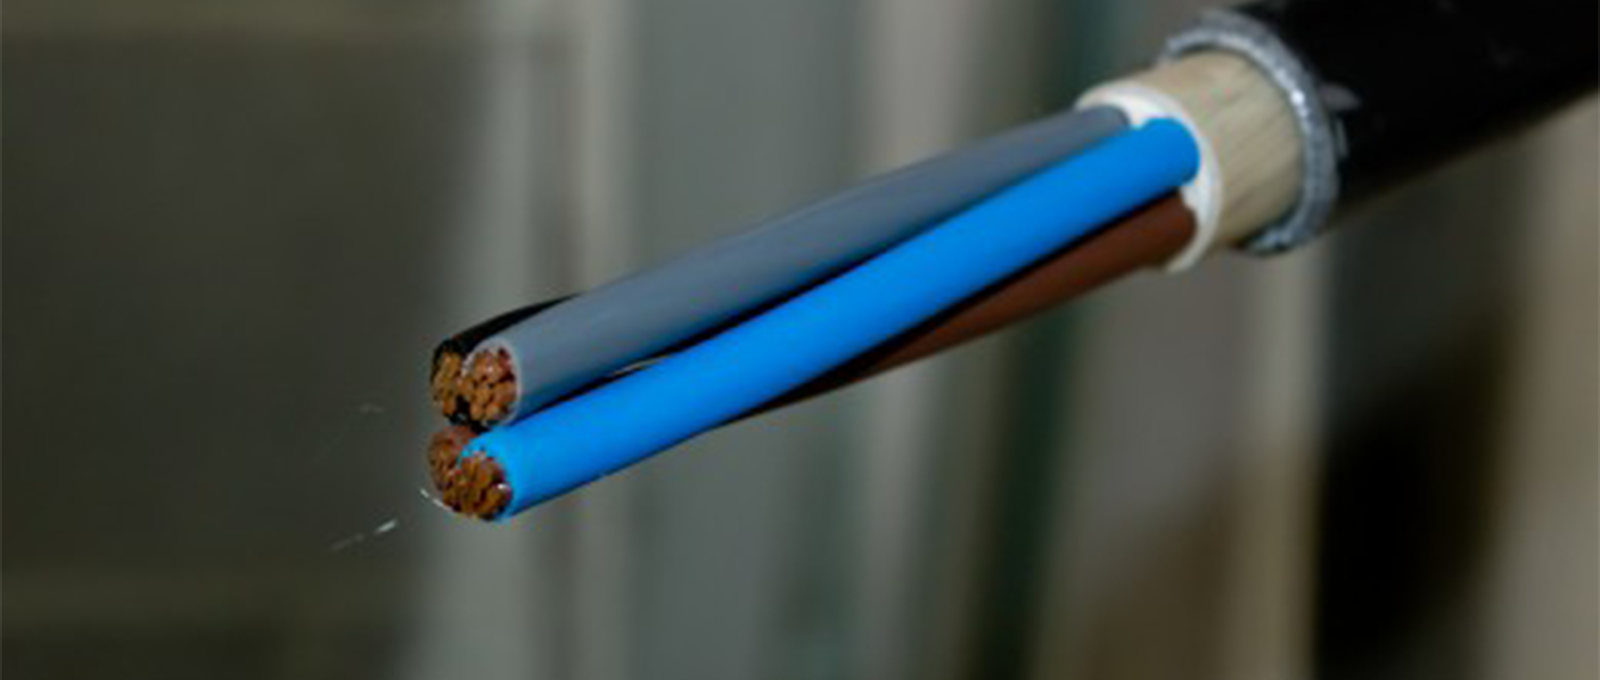 Image showing the inside of a power cable